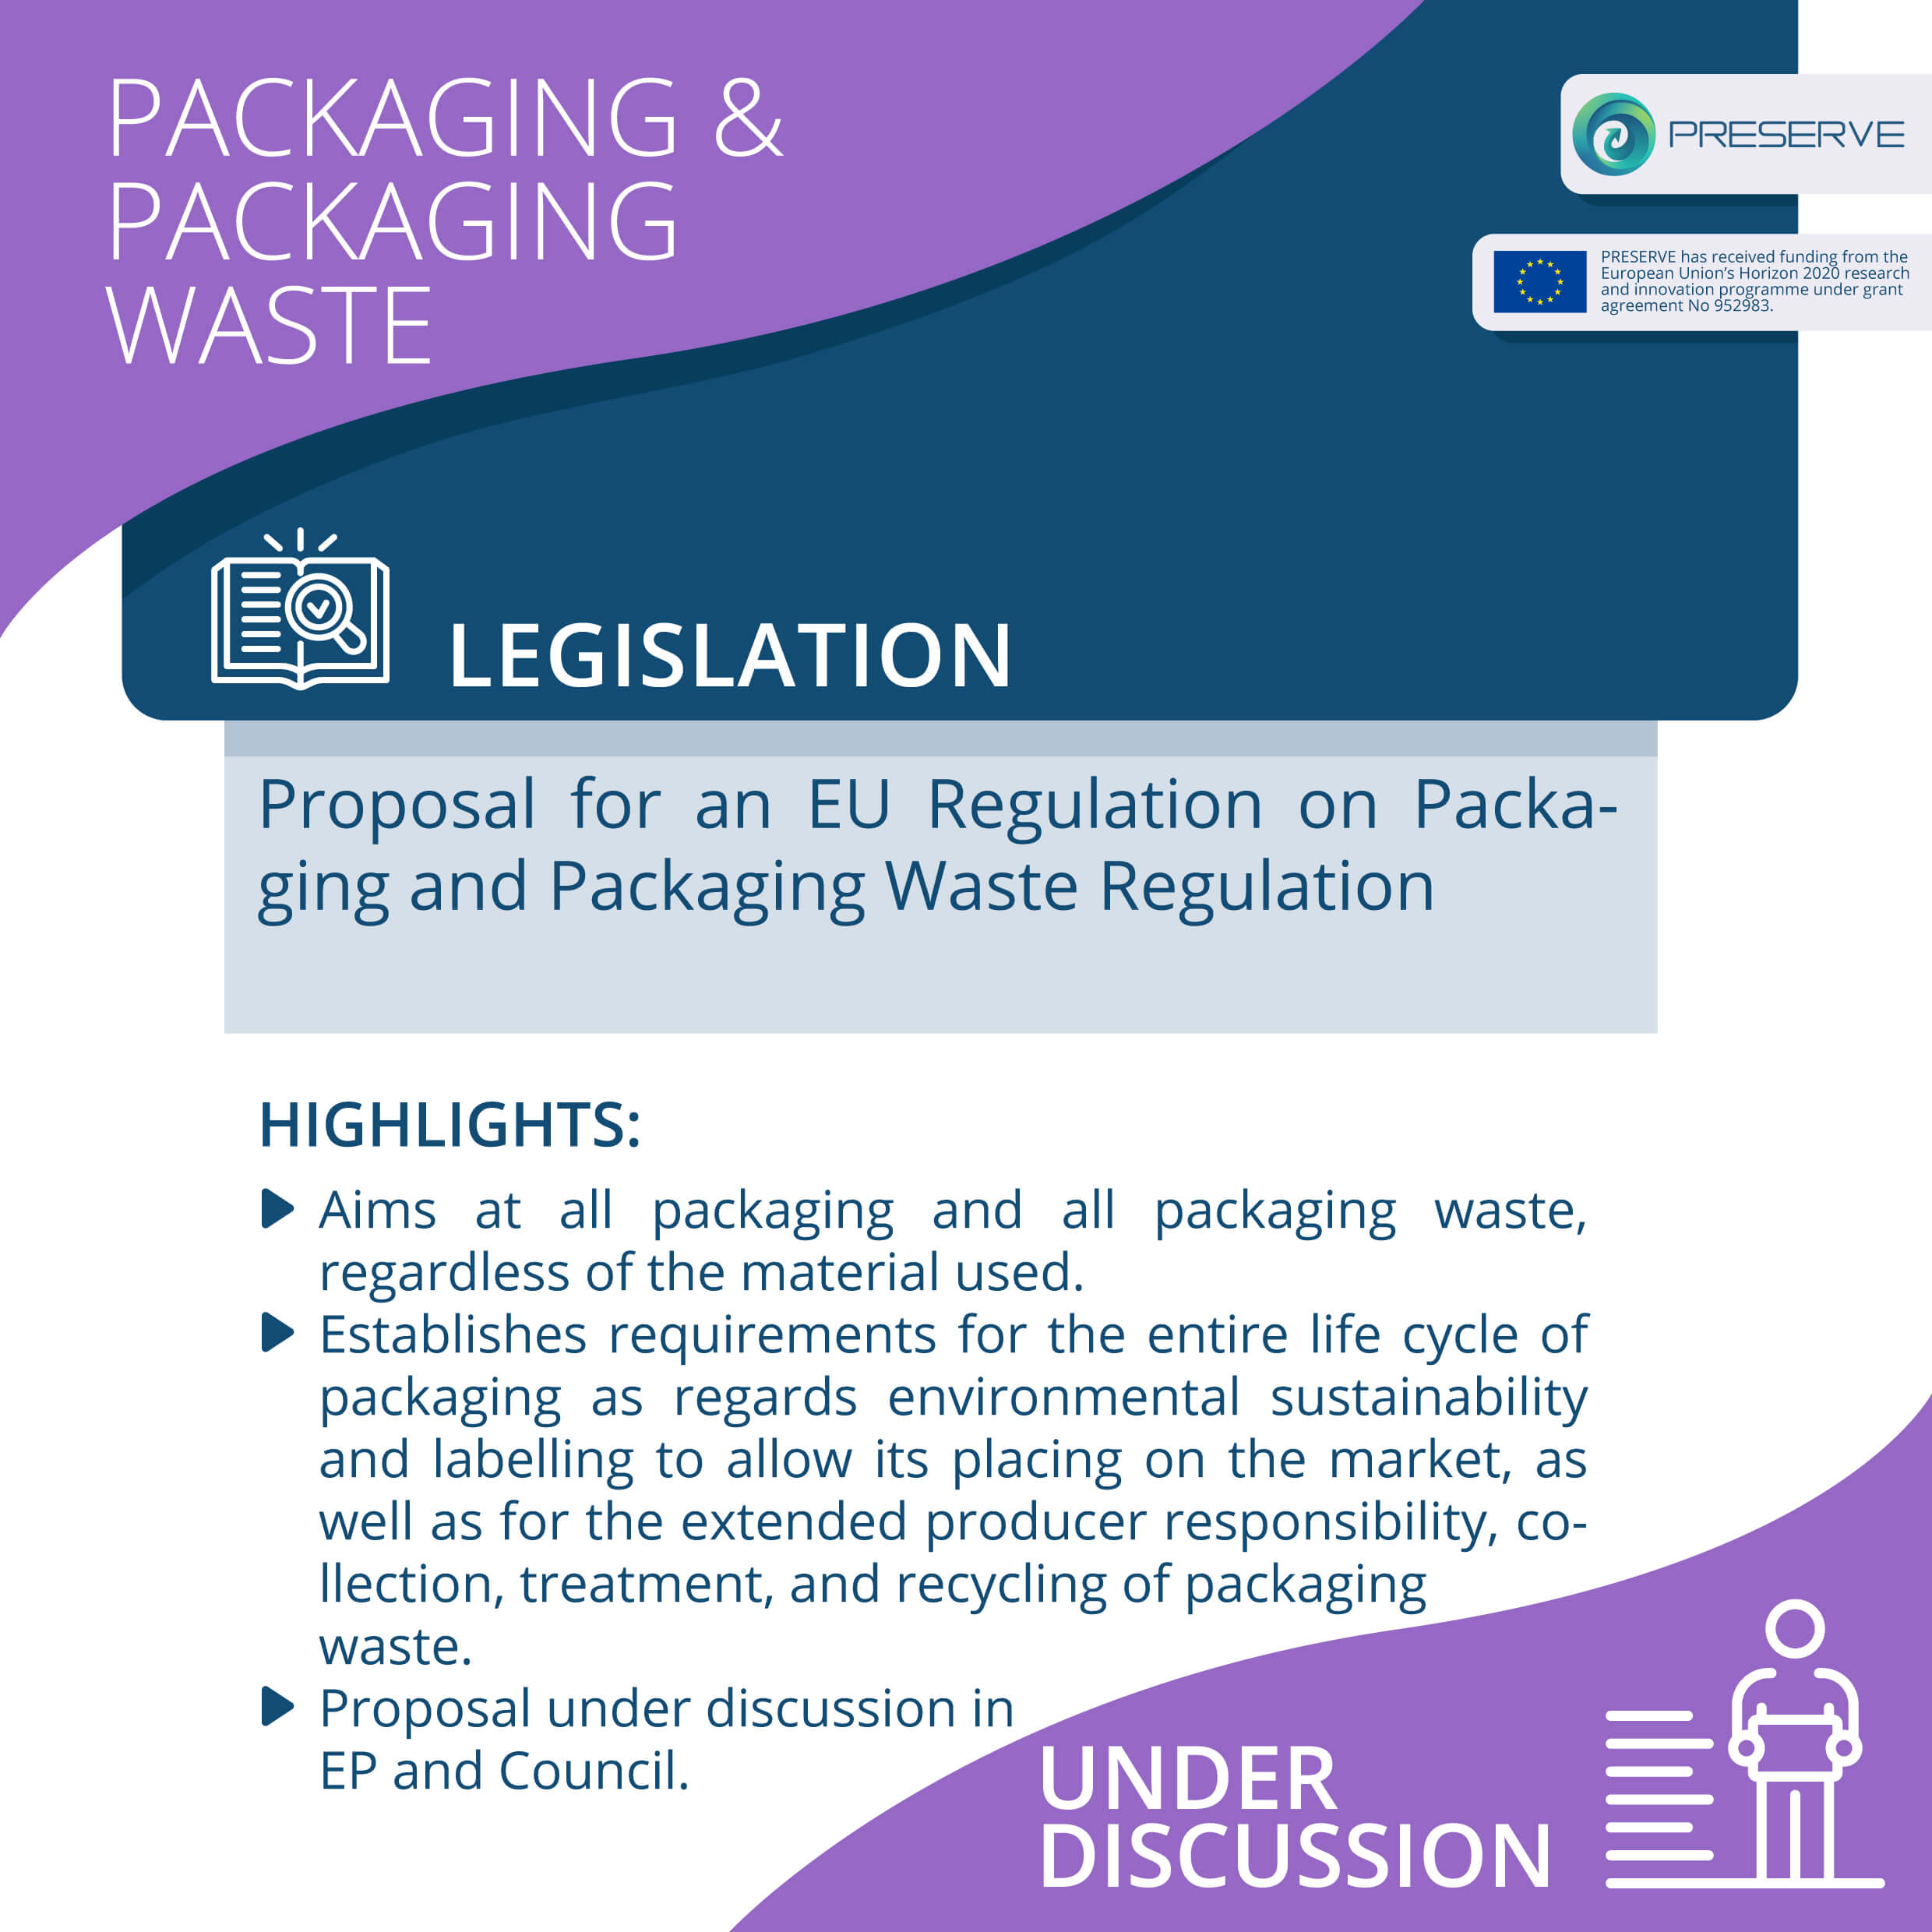 Packaging and packaging waste and PRESERVE